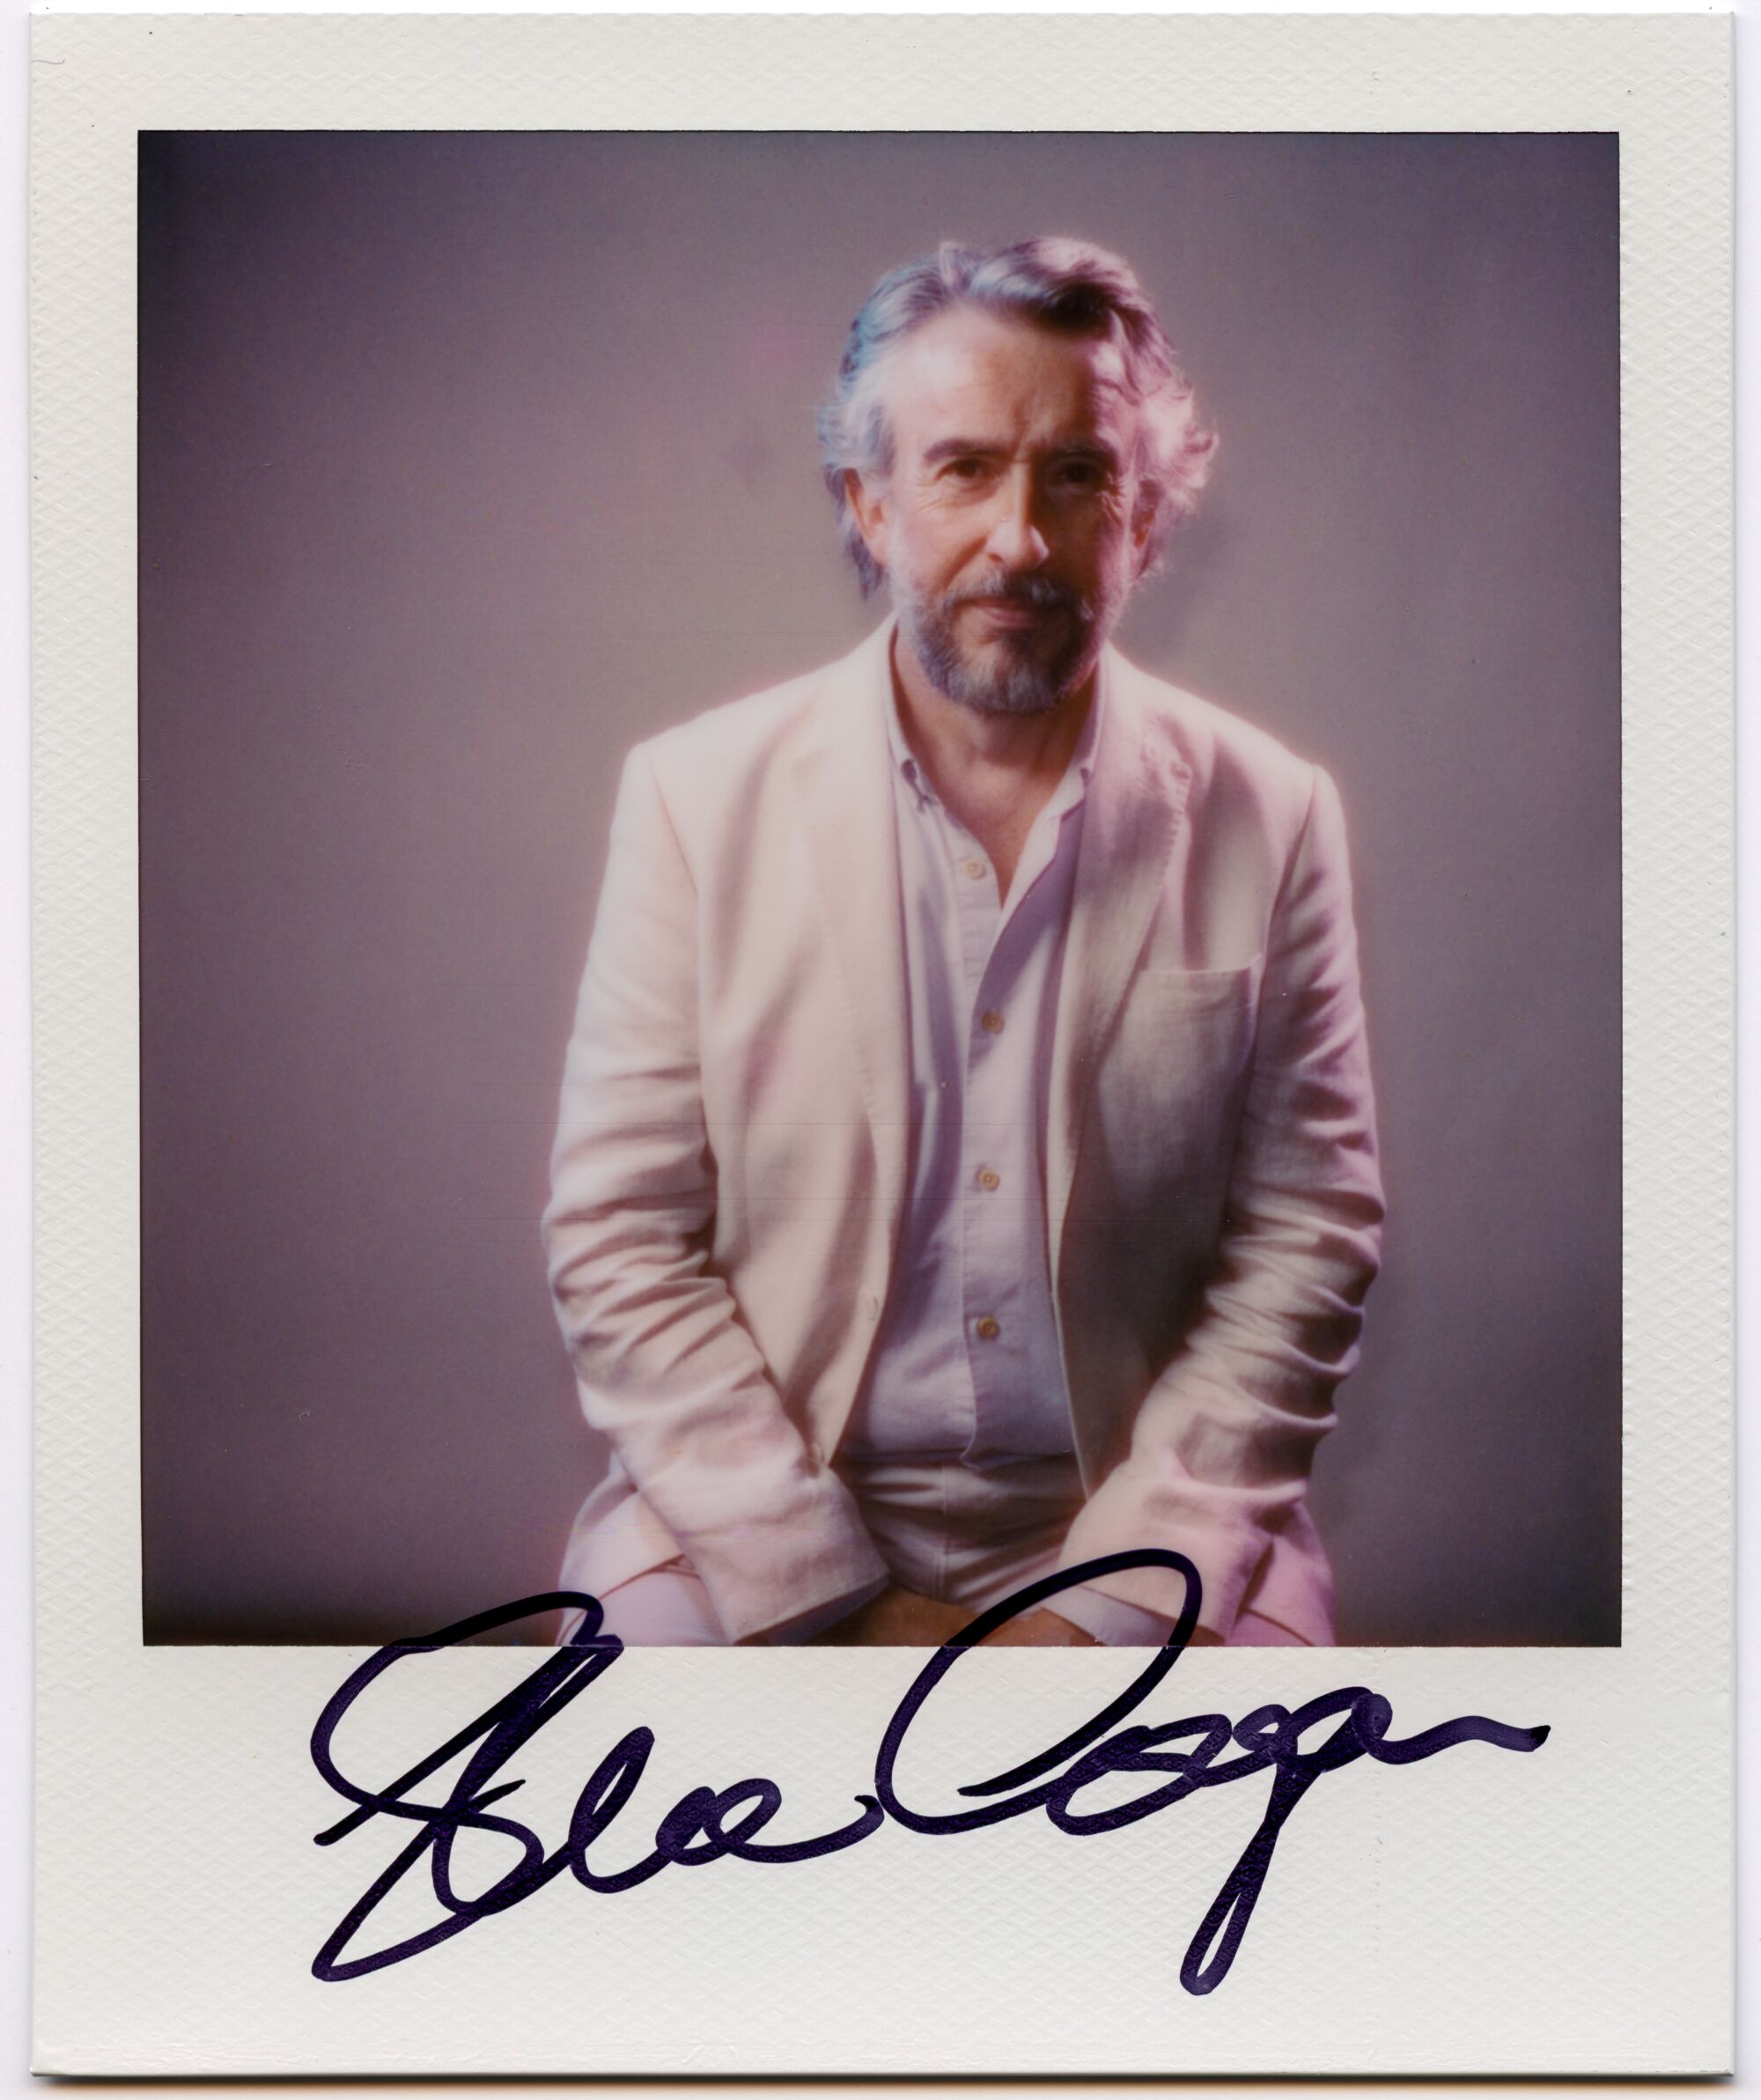 Steve Coogan of "The Lost King"